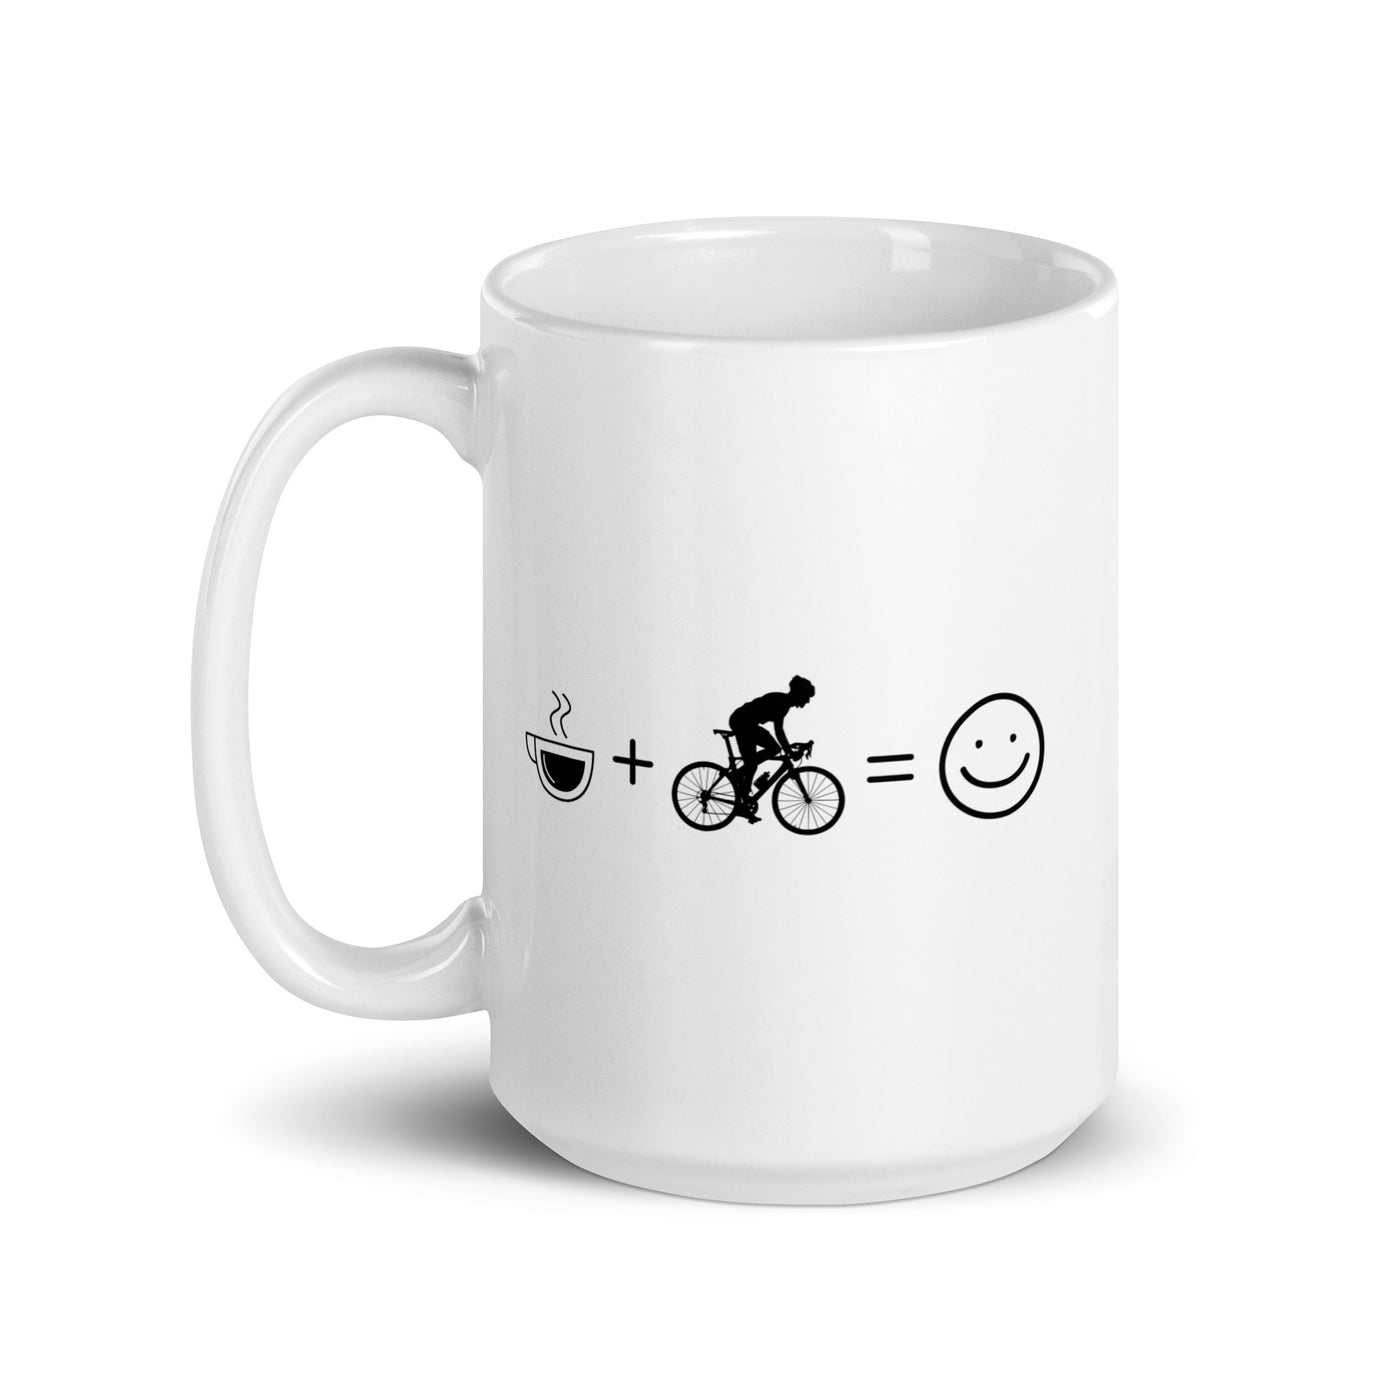 Coffee Smile Face And Cycling 1 - Tasse fahrrad